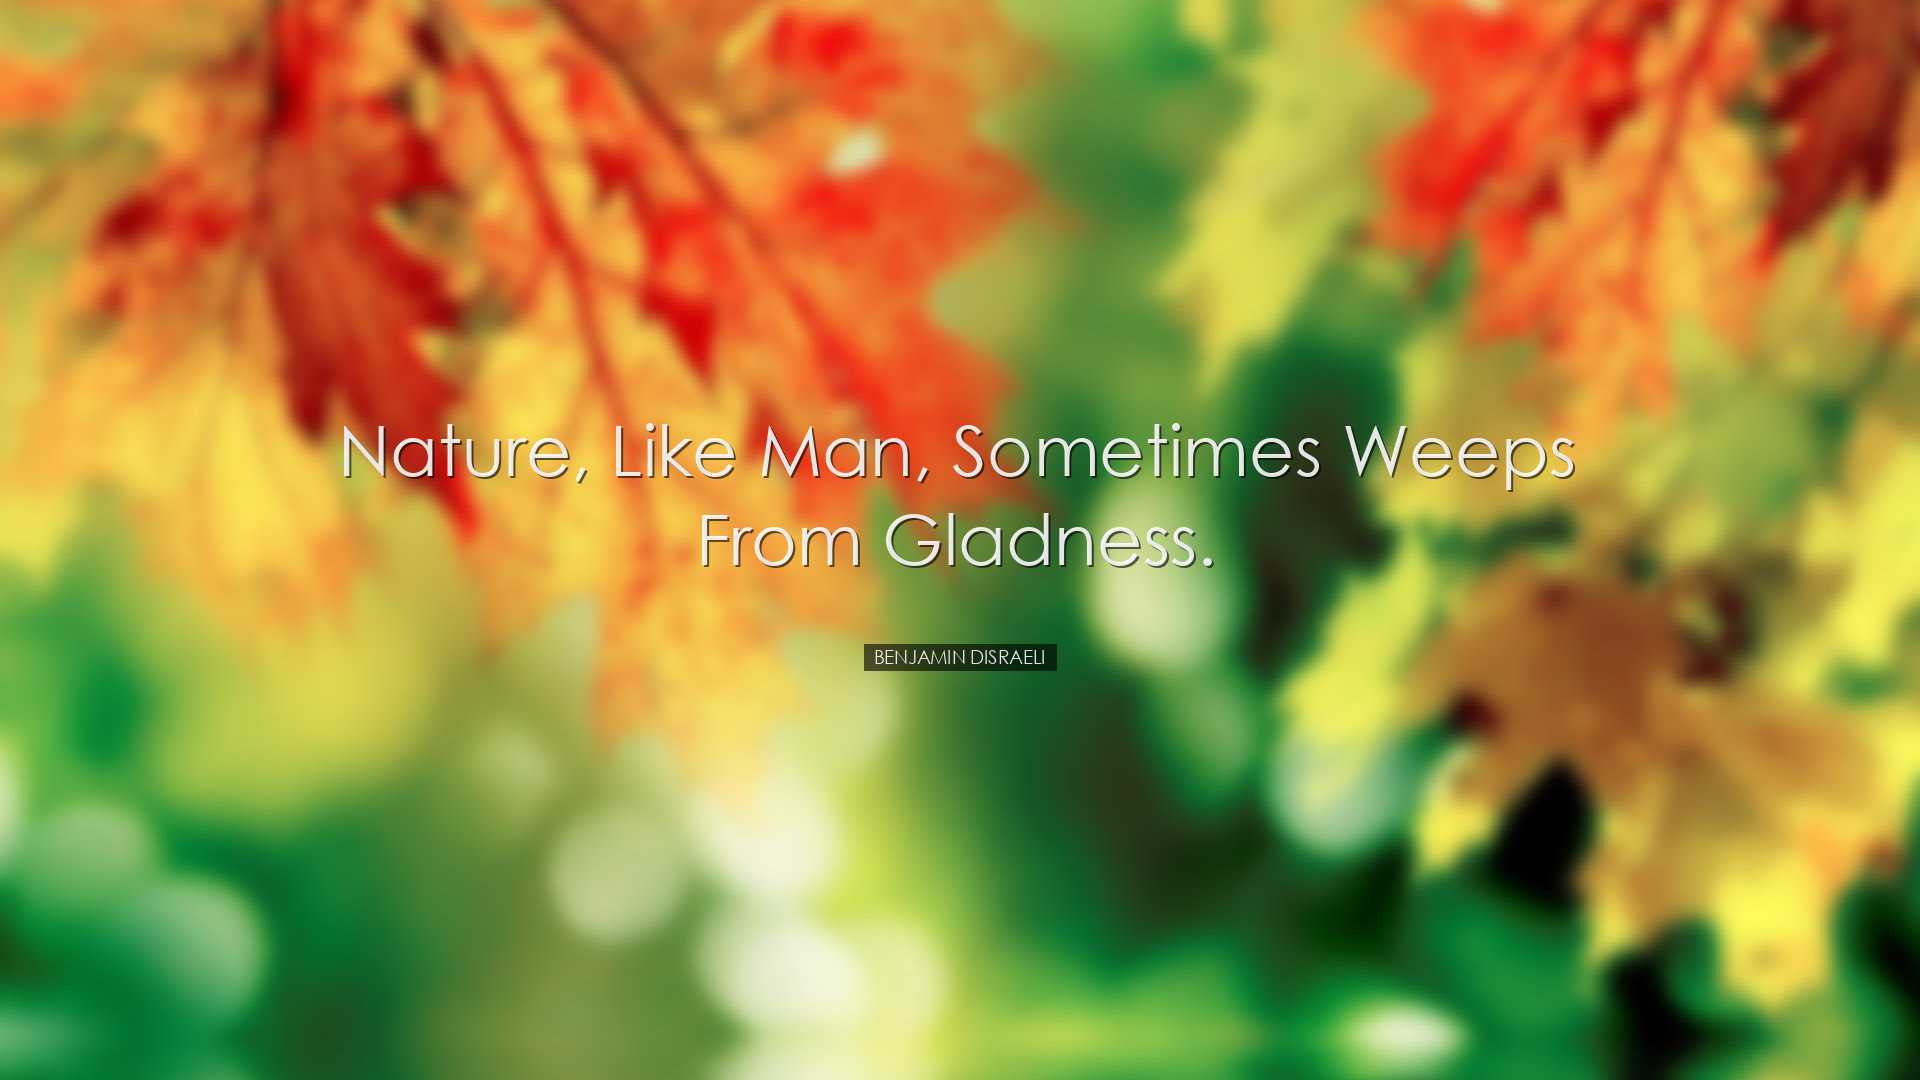 Nature, like man, sometimes weeps from gladness. - Benjamin Disrae